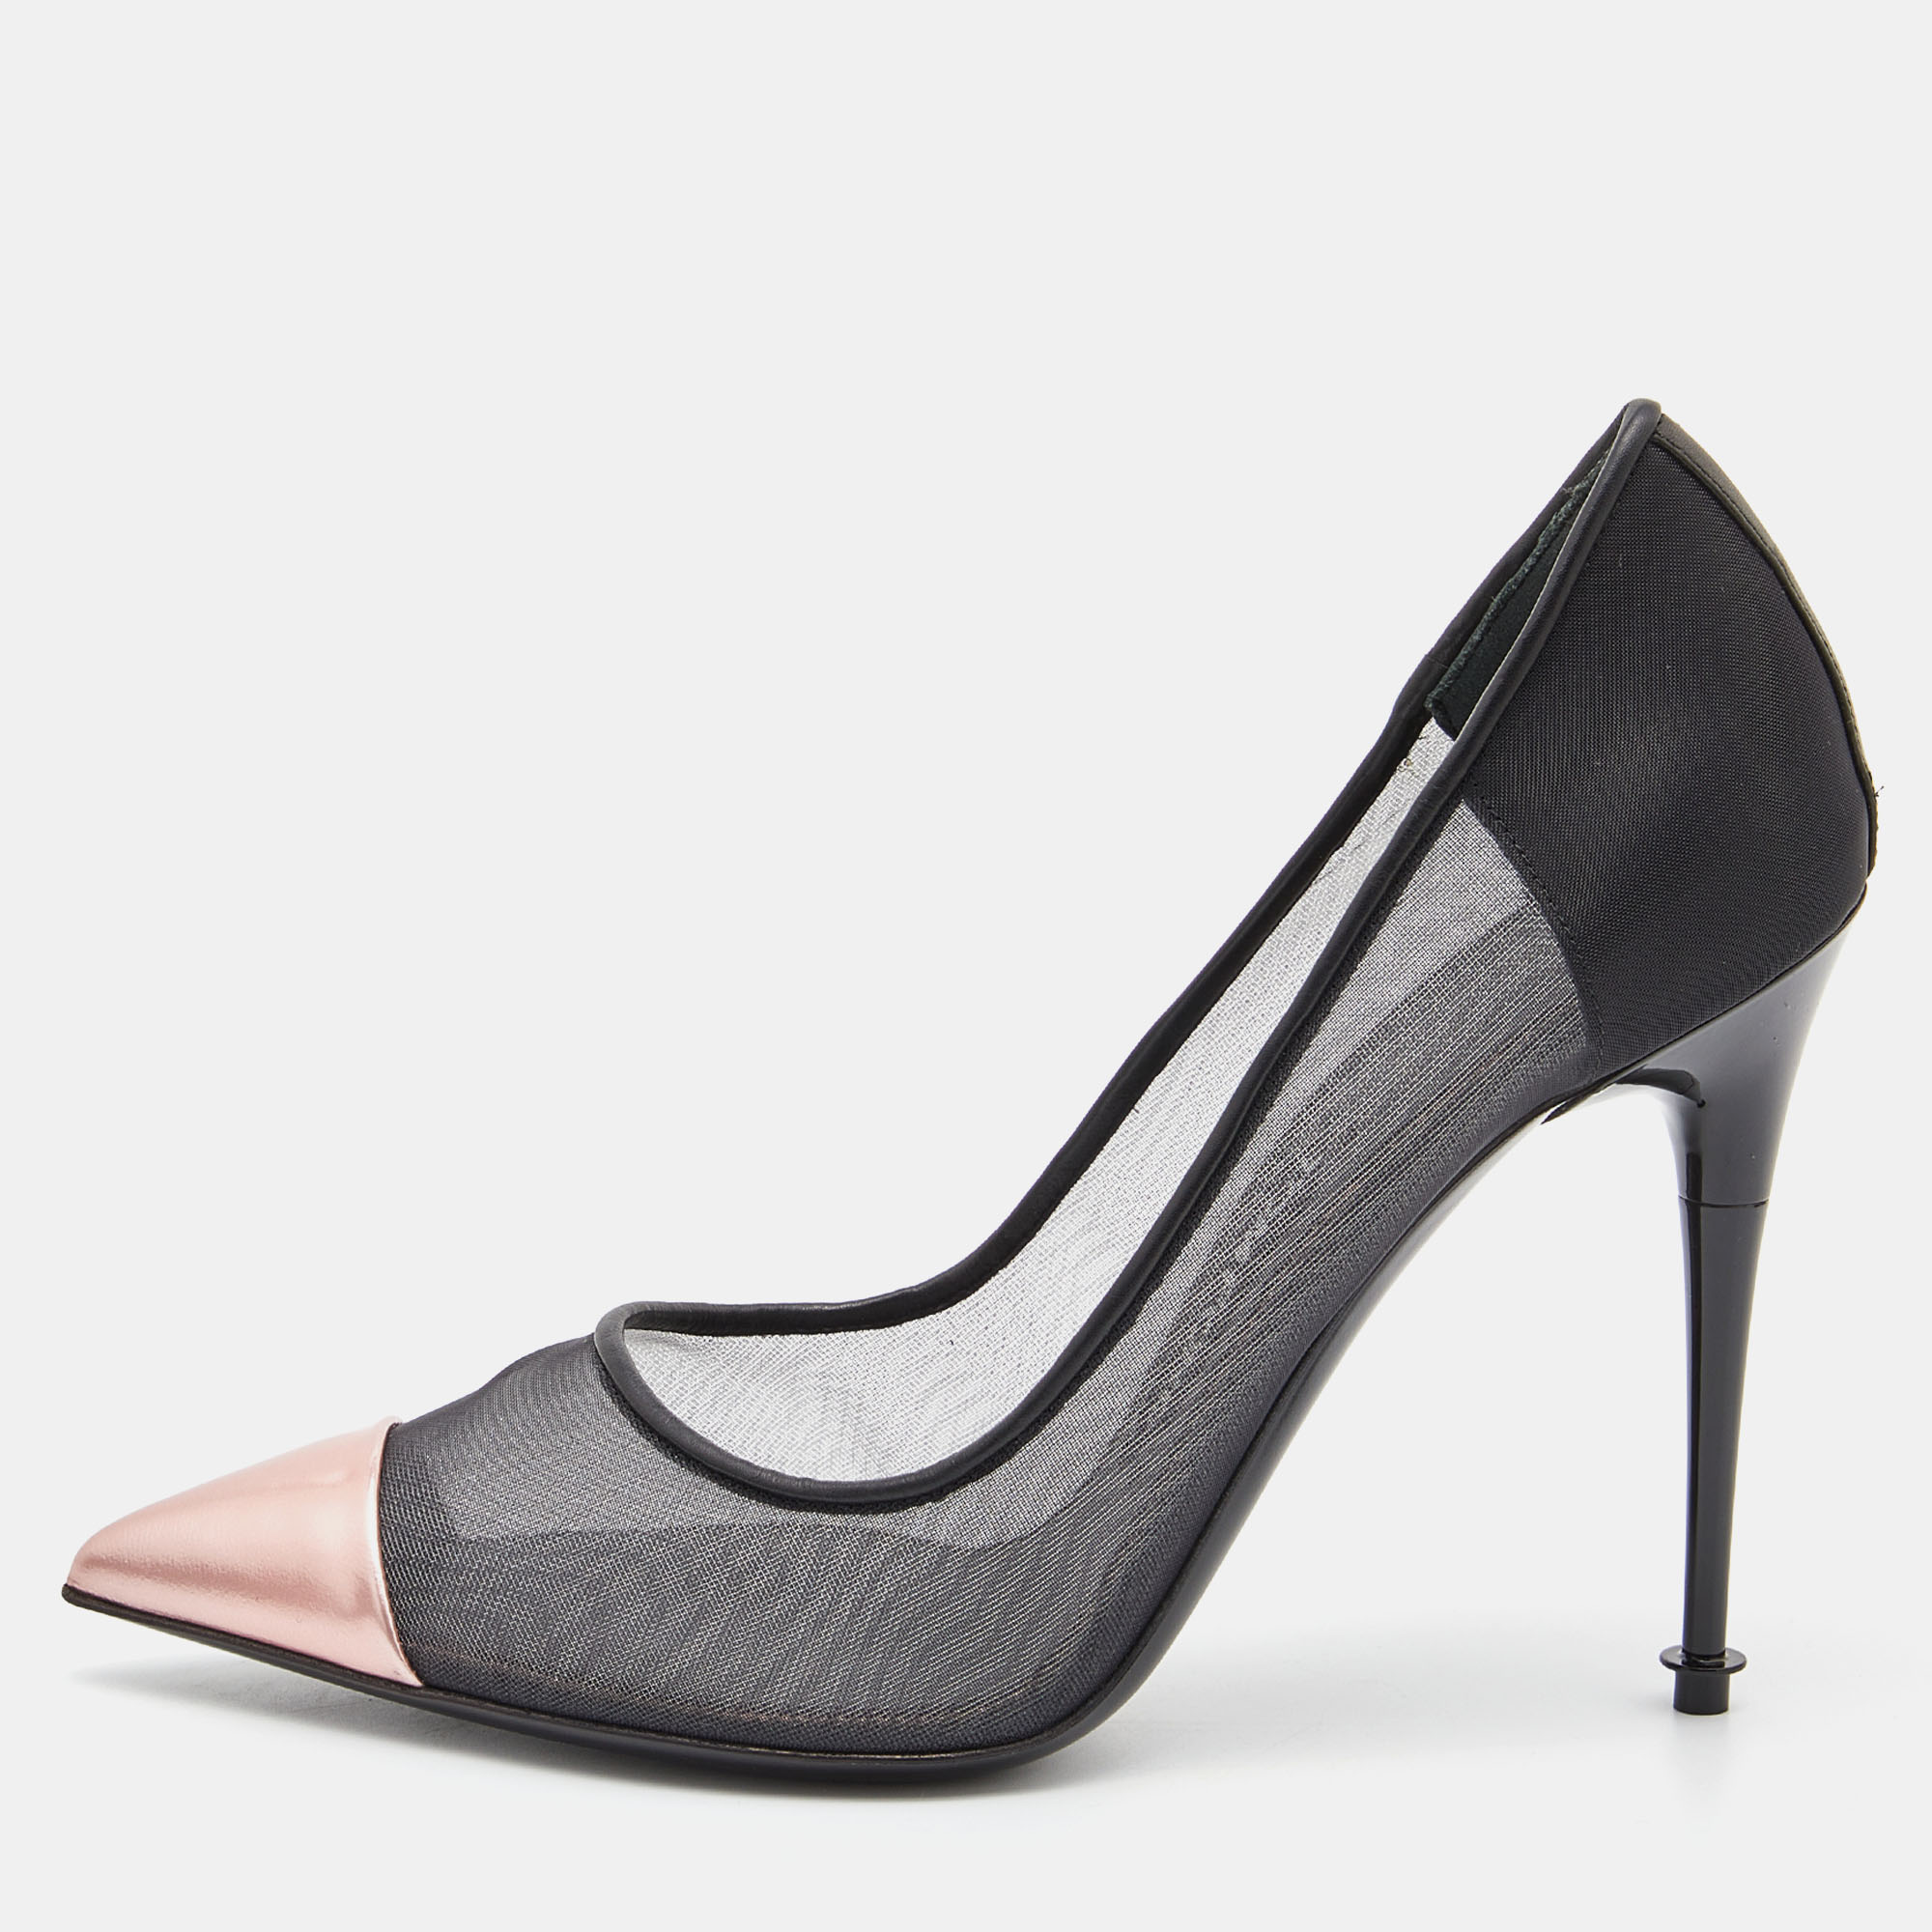 These pumps from Tom Ford are meant for seasons of comfort and style. Crafted from mesh and leather they feature an elegant shape with pointed toes and 11 cm heels. ​These pumps are a must have